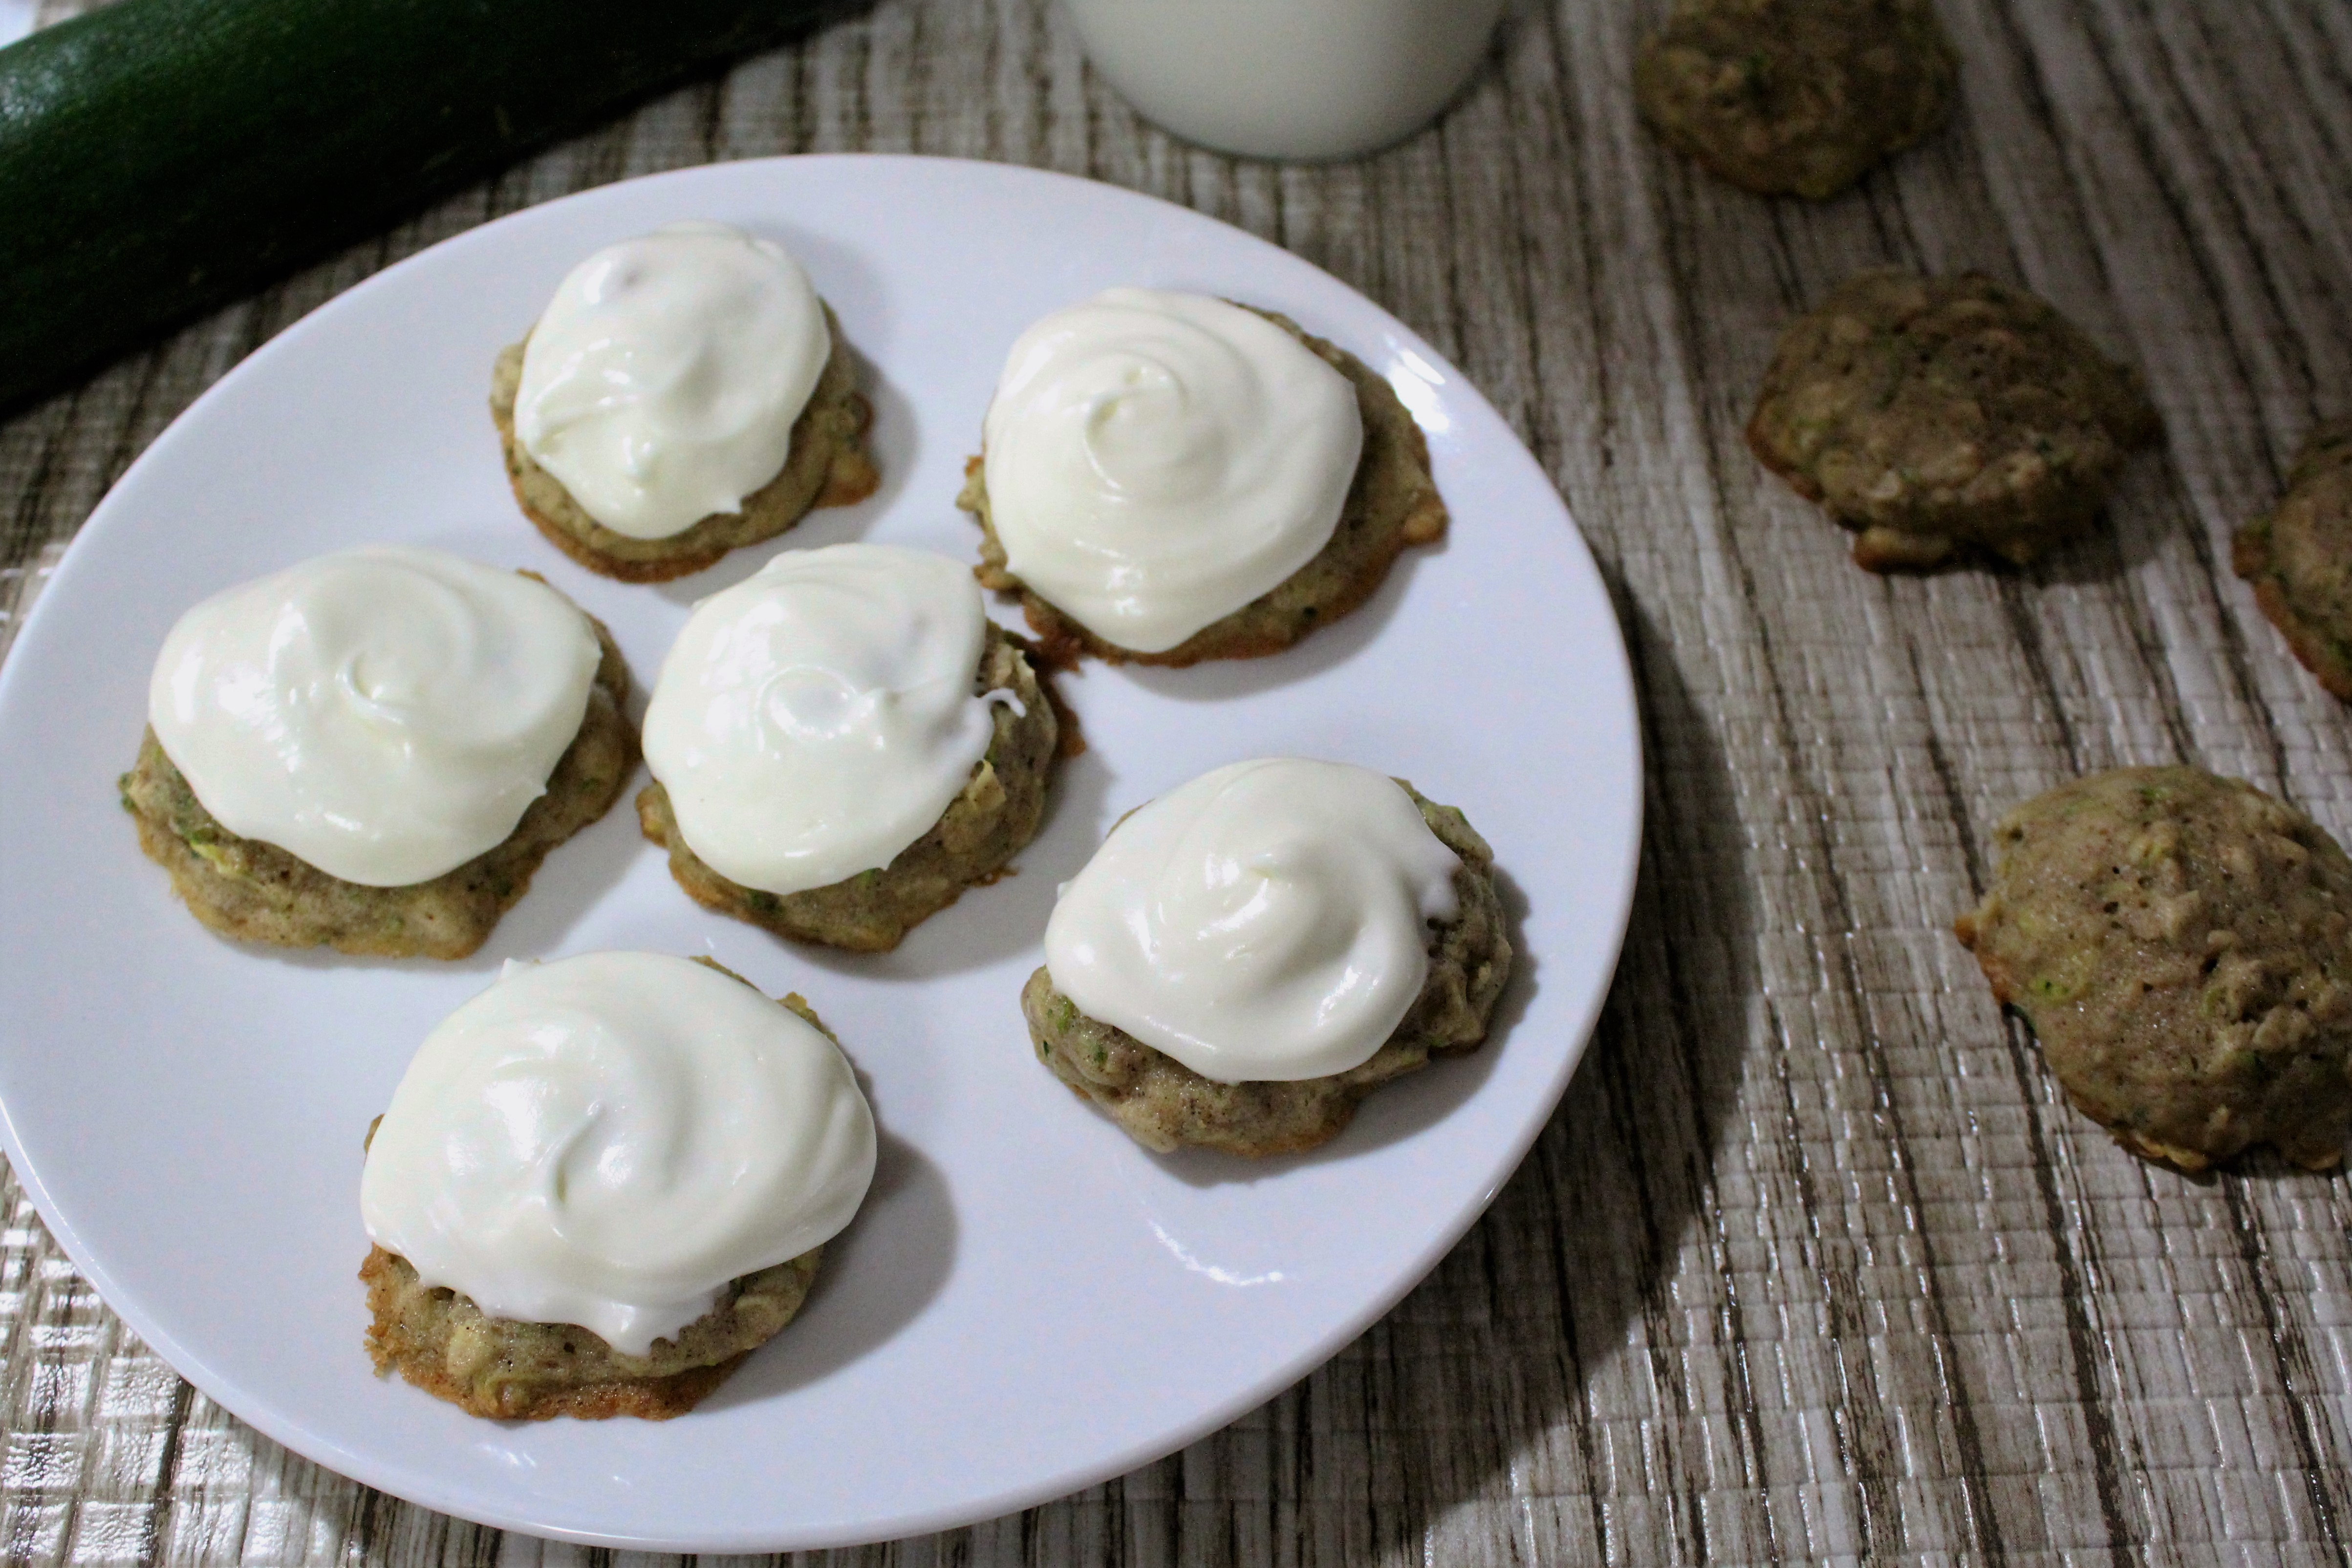 This is a delicious recipe for zucchini oatmeal cookies with cream cheese frosting. A great way to get the kids to eat zucchini!